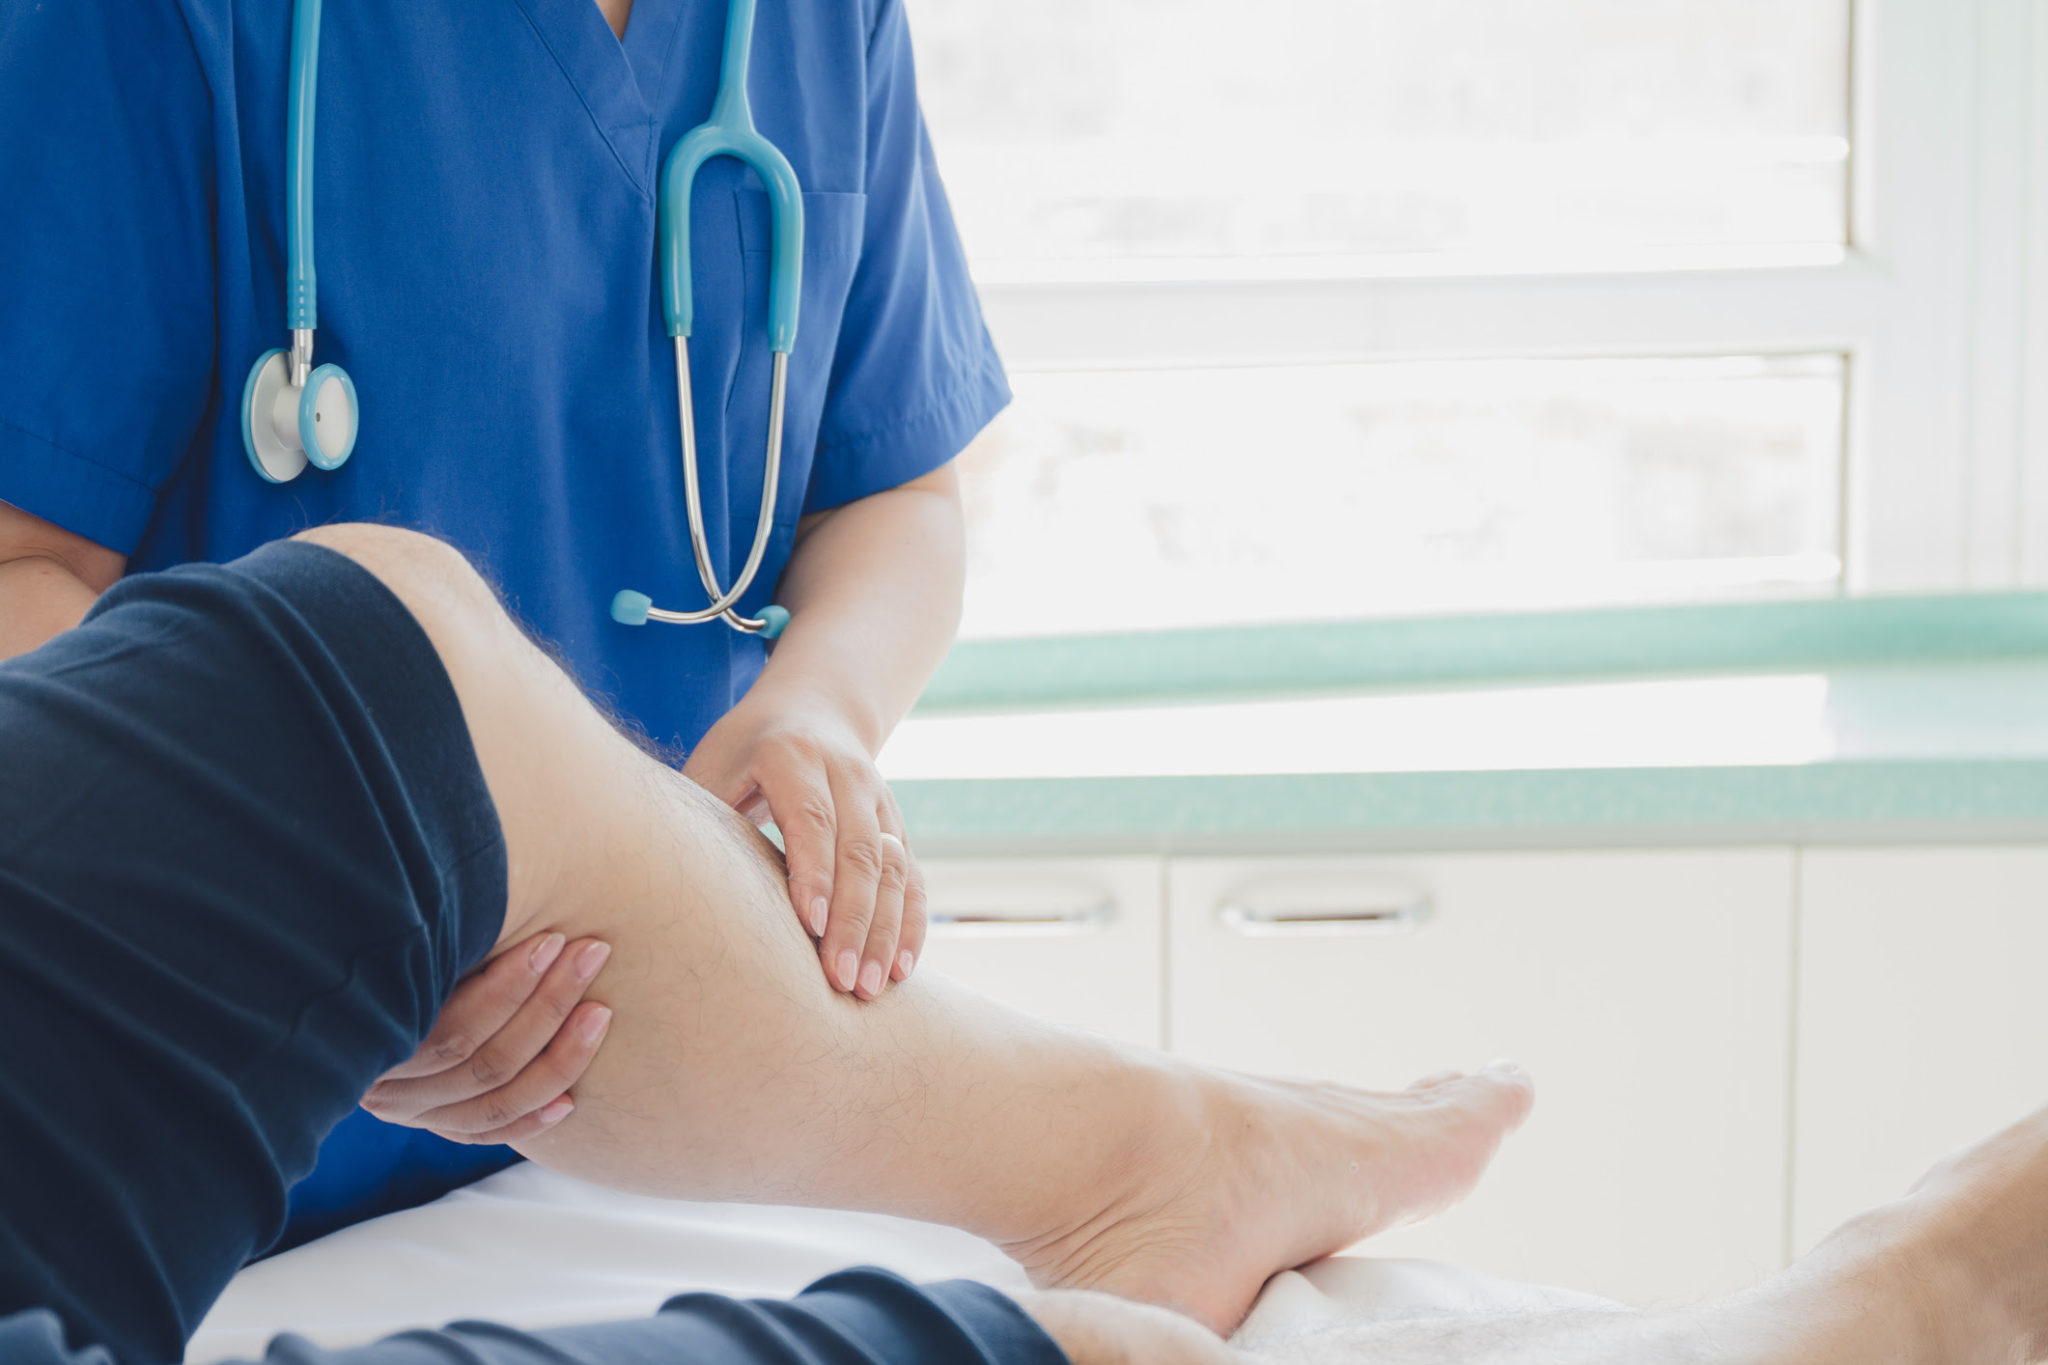 7 Signs that You Need to Visit a Vein Specialist to Treat Your Vein Disease